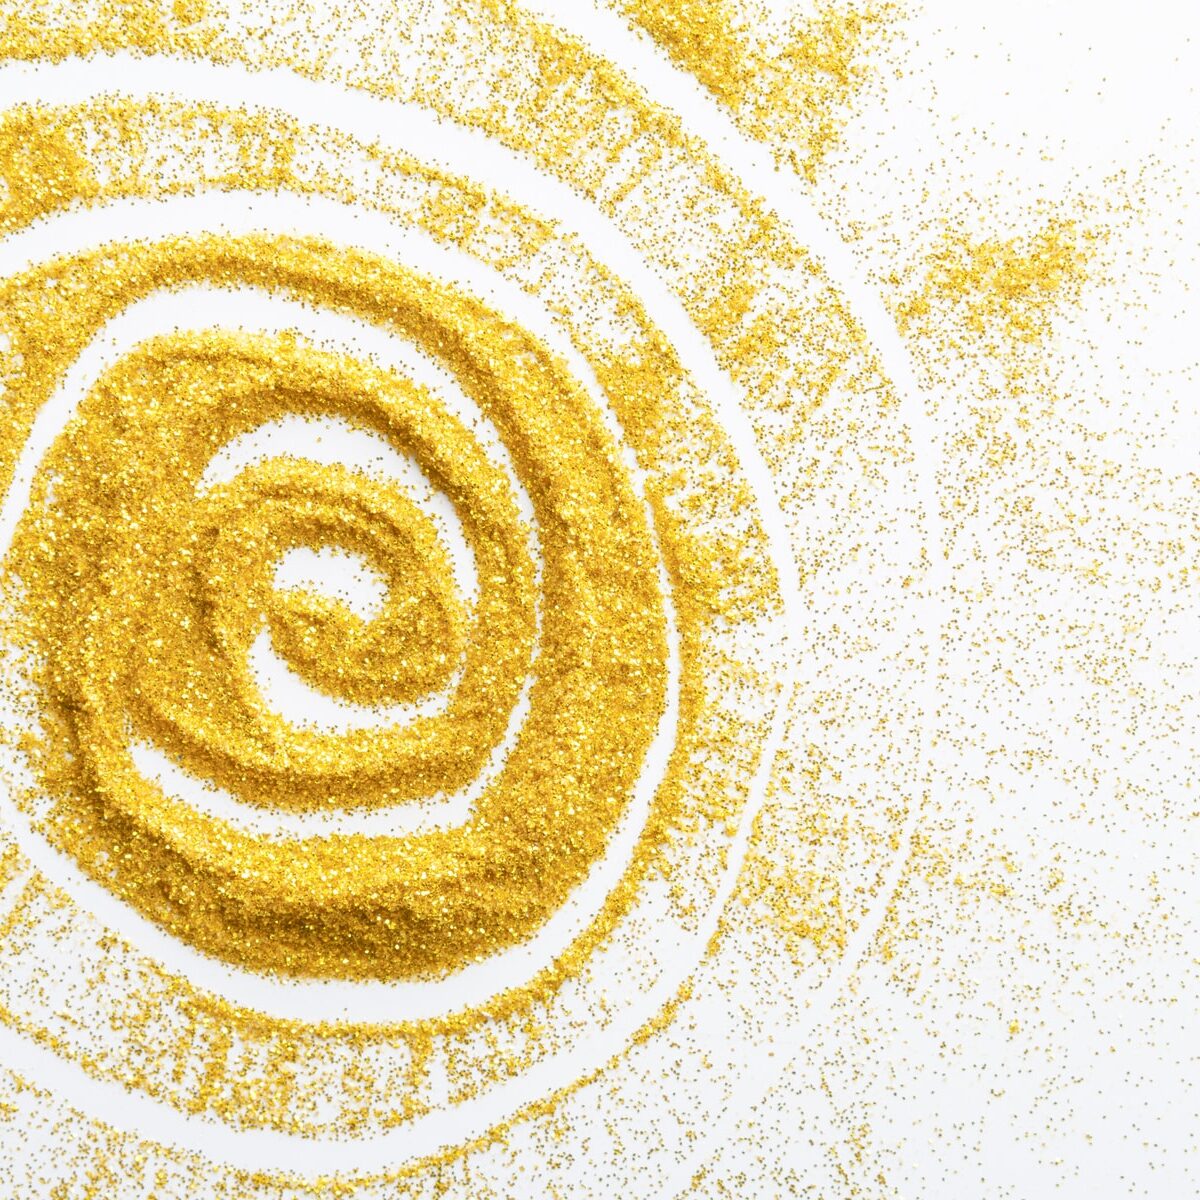 Sand painting concept. Golden glitter sand texture spread over white surface with sun shape, abstract background, top view. Yellow dusty shimmer decoration, shiny and sparkling.